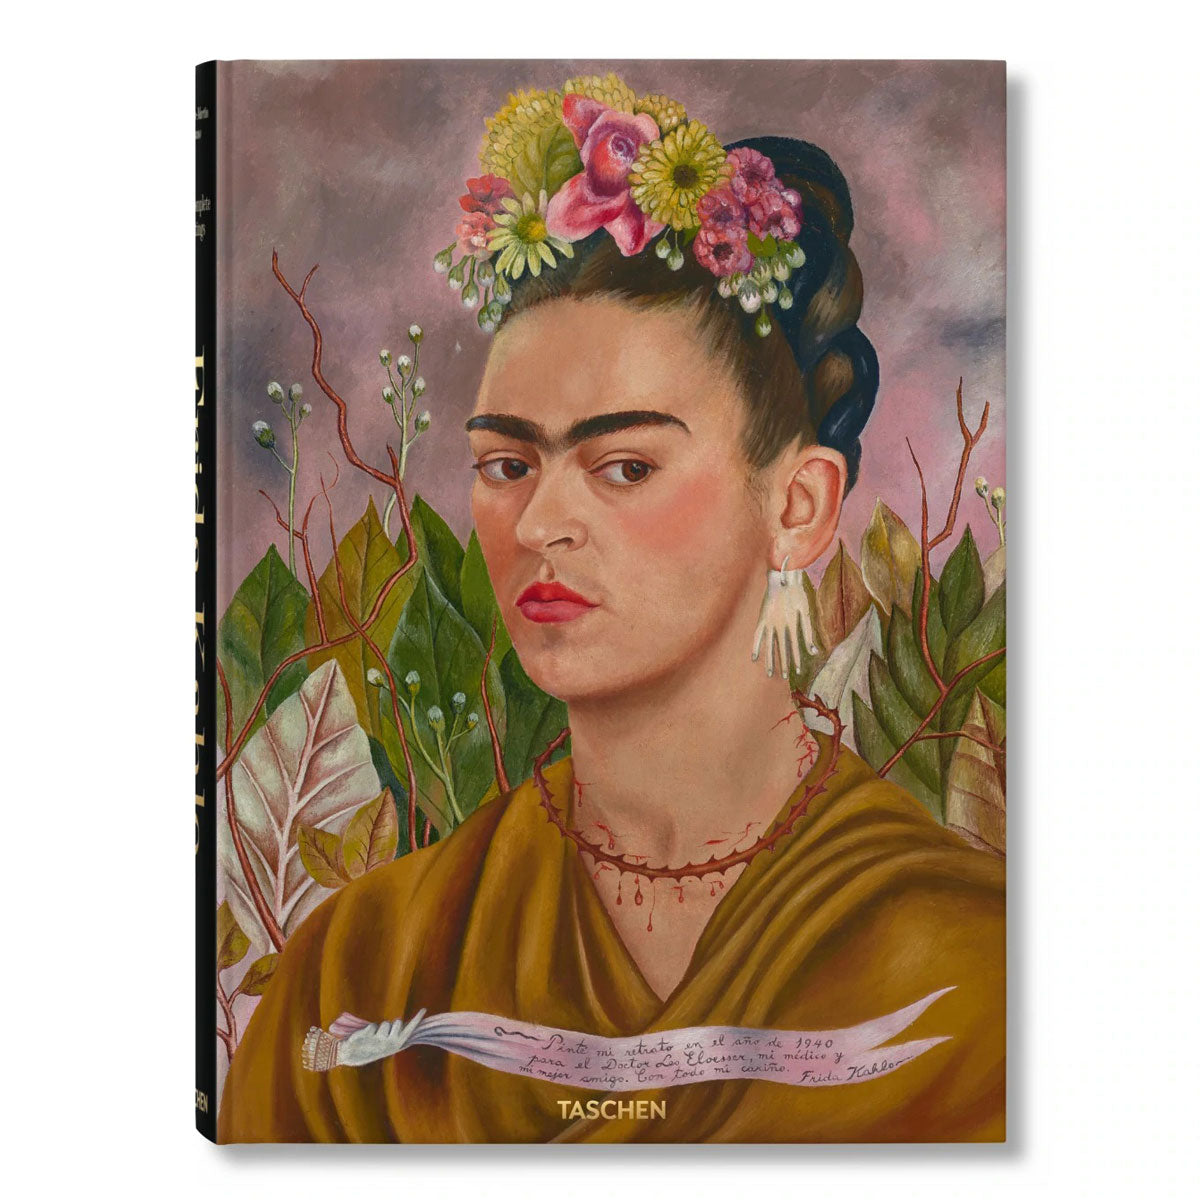 Frida Kahlo: The Complete Paintings&#39; front cover.